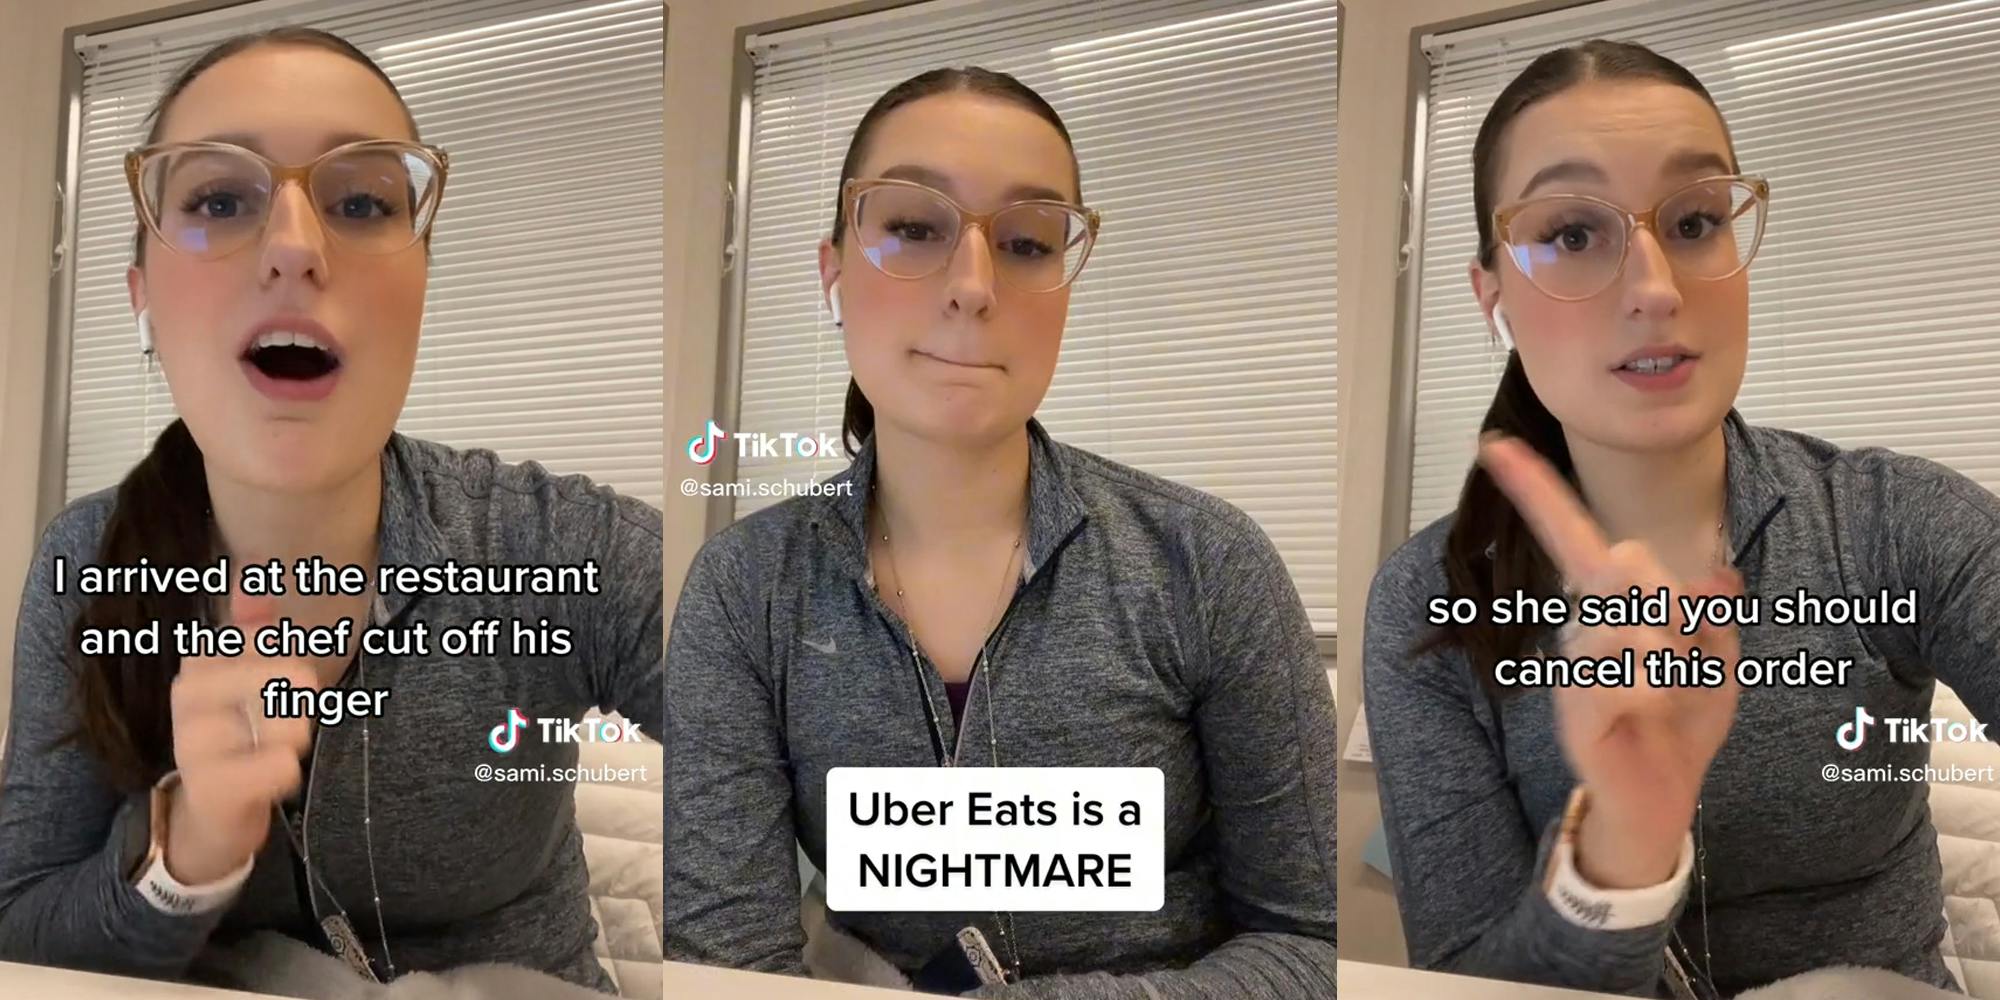 young woman with captions "i arrived at the restaurant and the chef cut off his finger", "uber eats is a nightmare", and "so she said you should cancel this order"